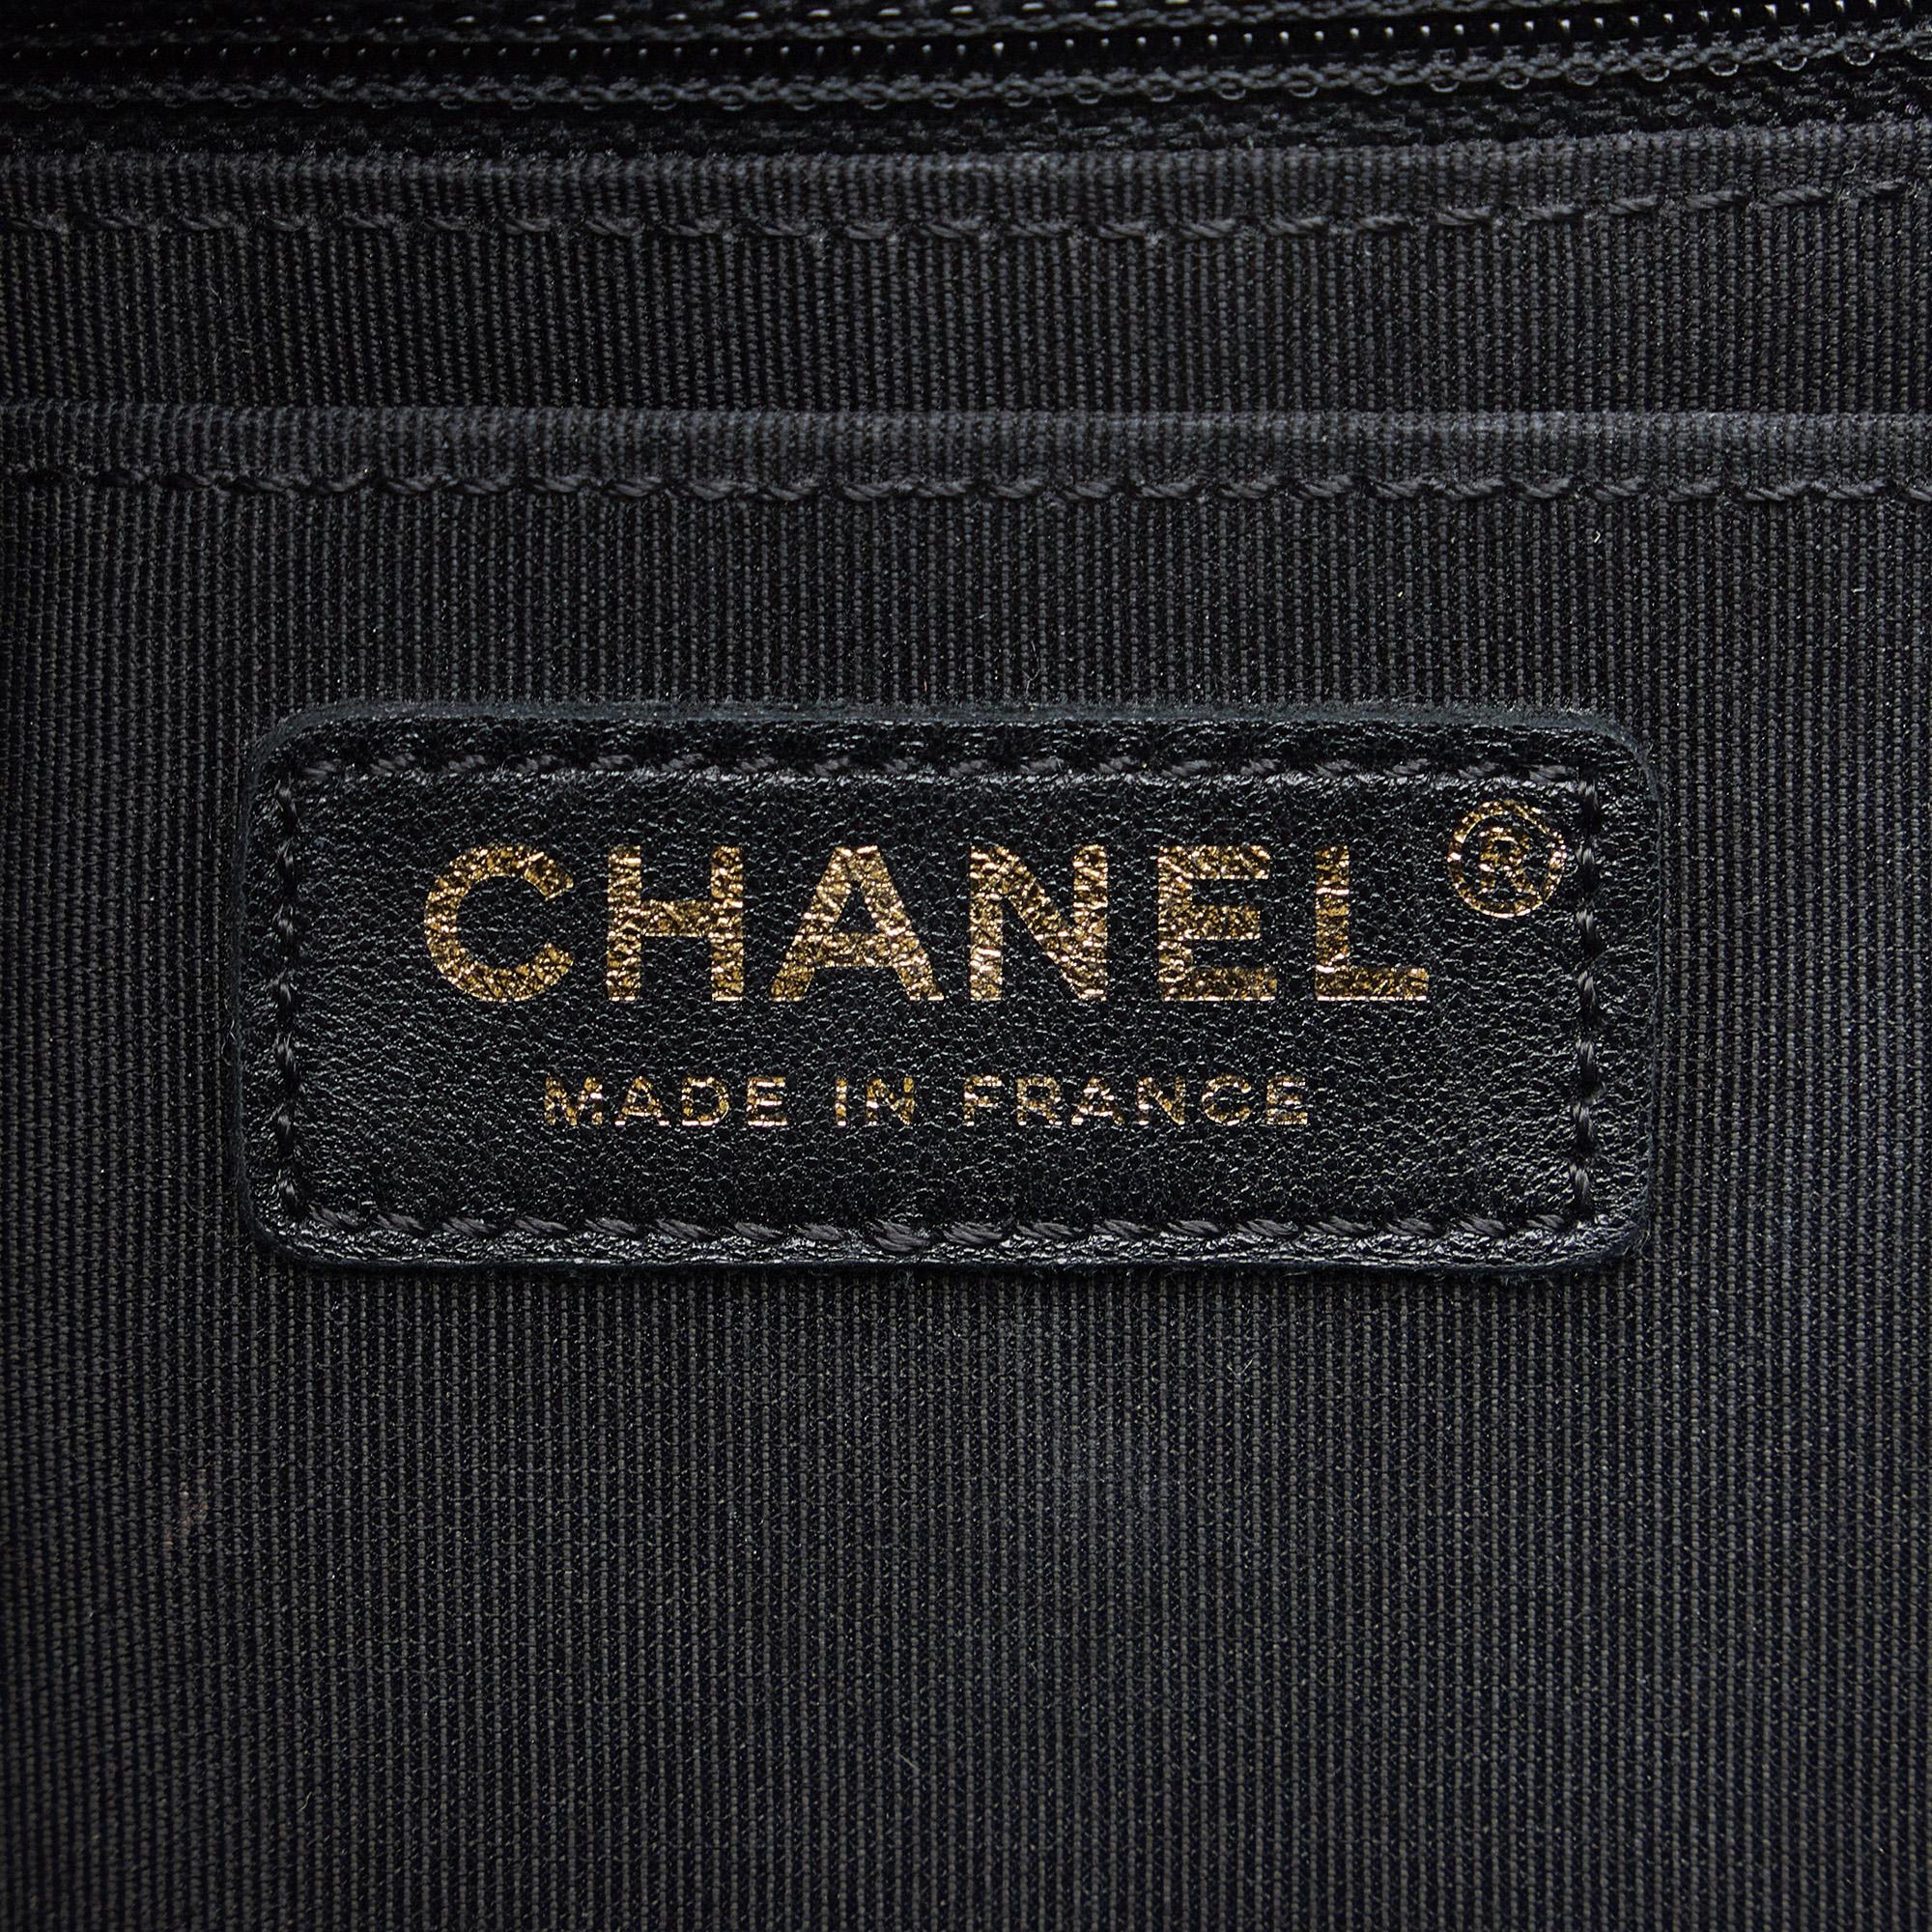 Chanel Black Quilted Boy Shopper Tote